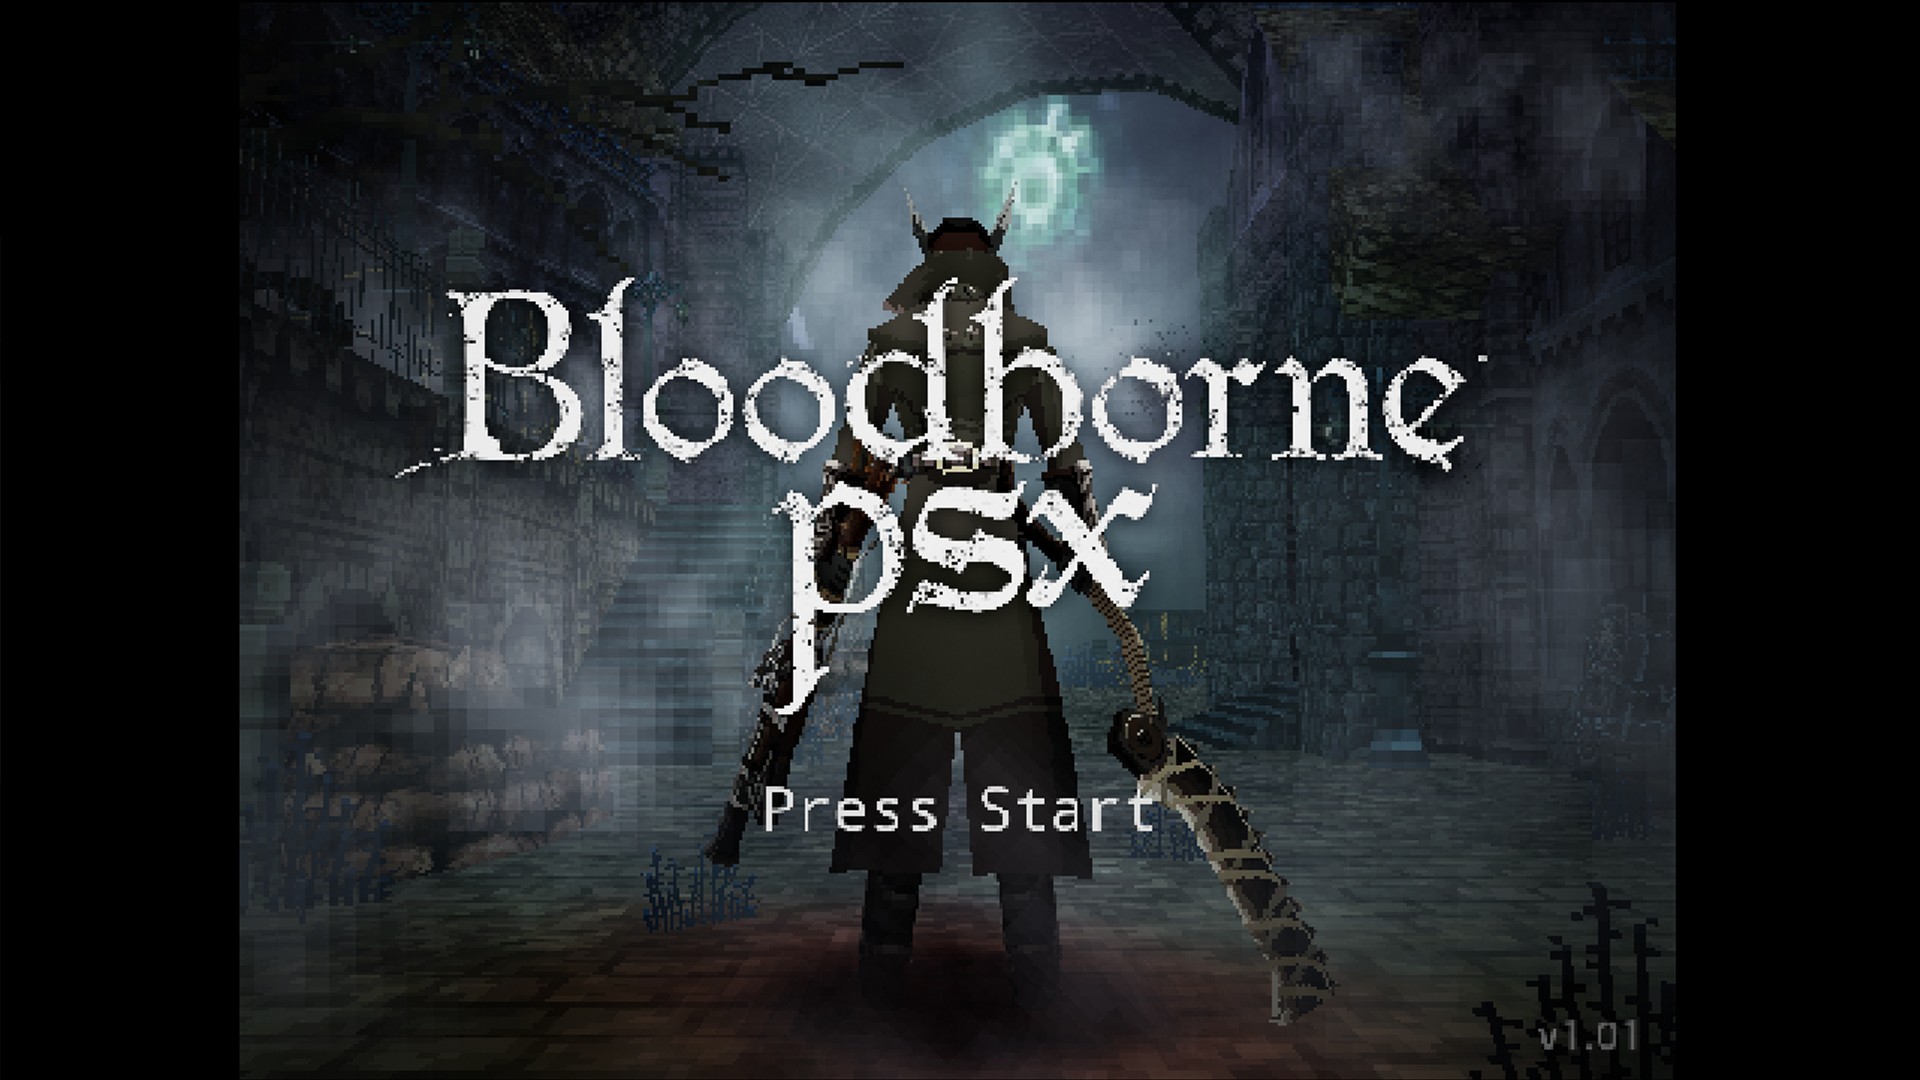 Bloodborne PSX May Look Old, But It Offers Something New